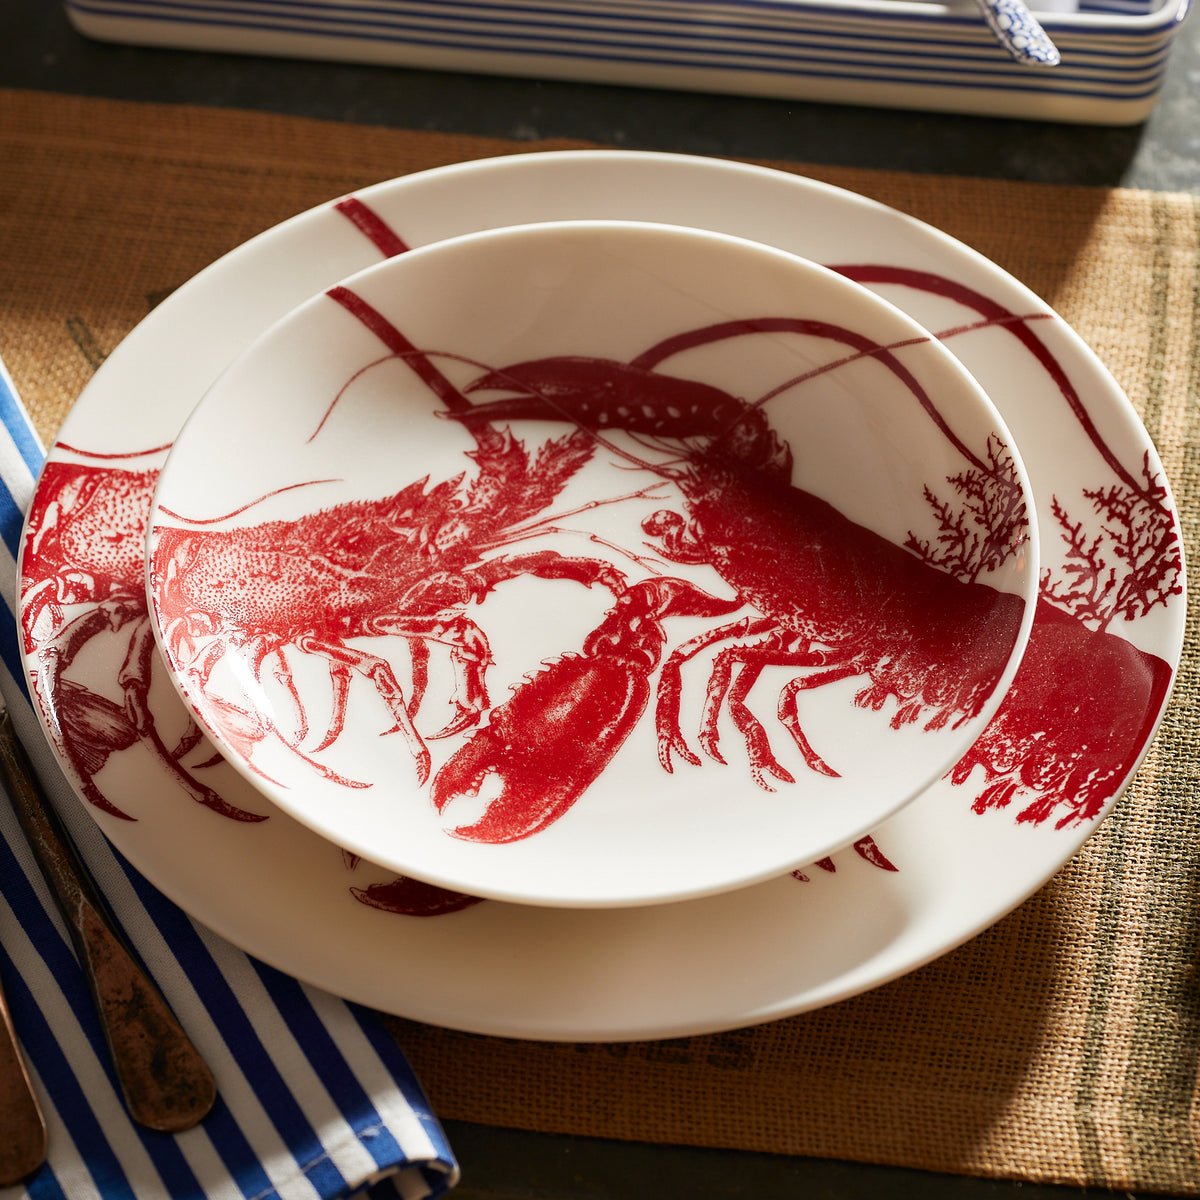 A close-up of white dishware featuring red lobster illustrations. A large plate and a Caskata Lobster Coupe Salad Plate with similar designs are stacked on a woven placemat next to a blue and white striped napkin, enhancing the seaside style.